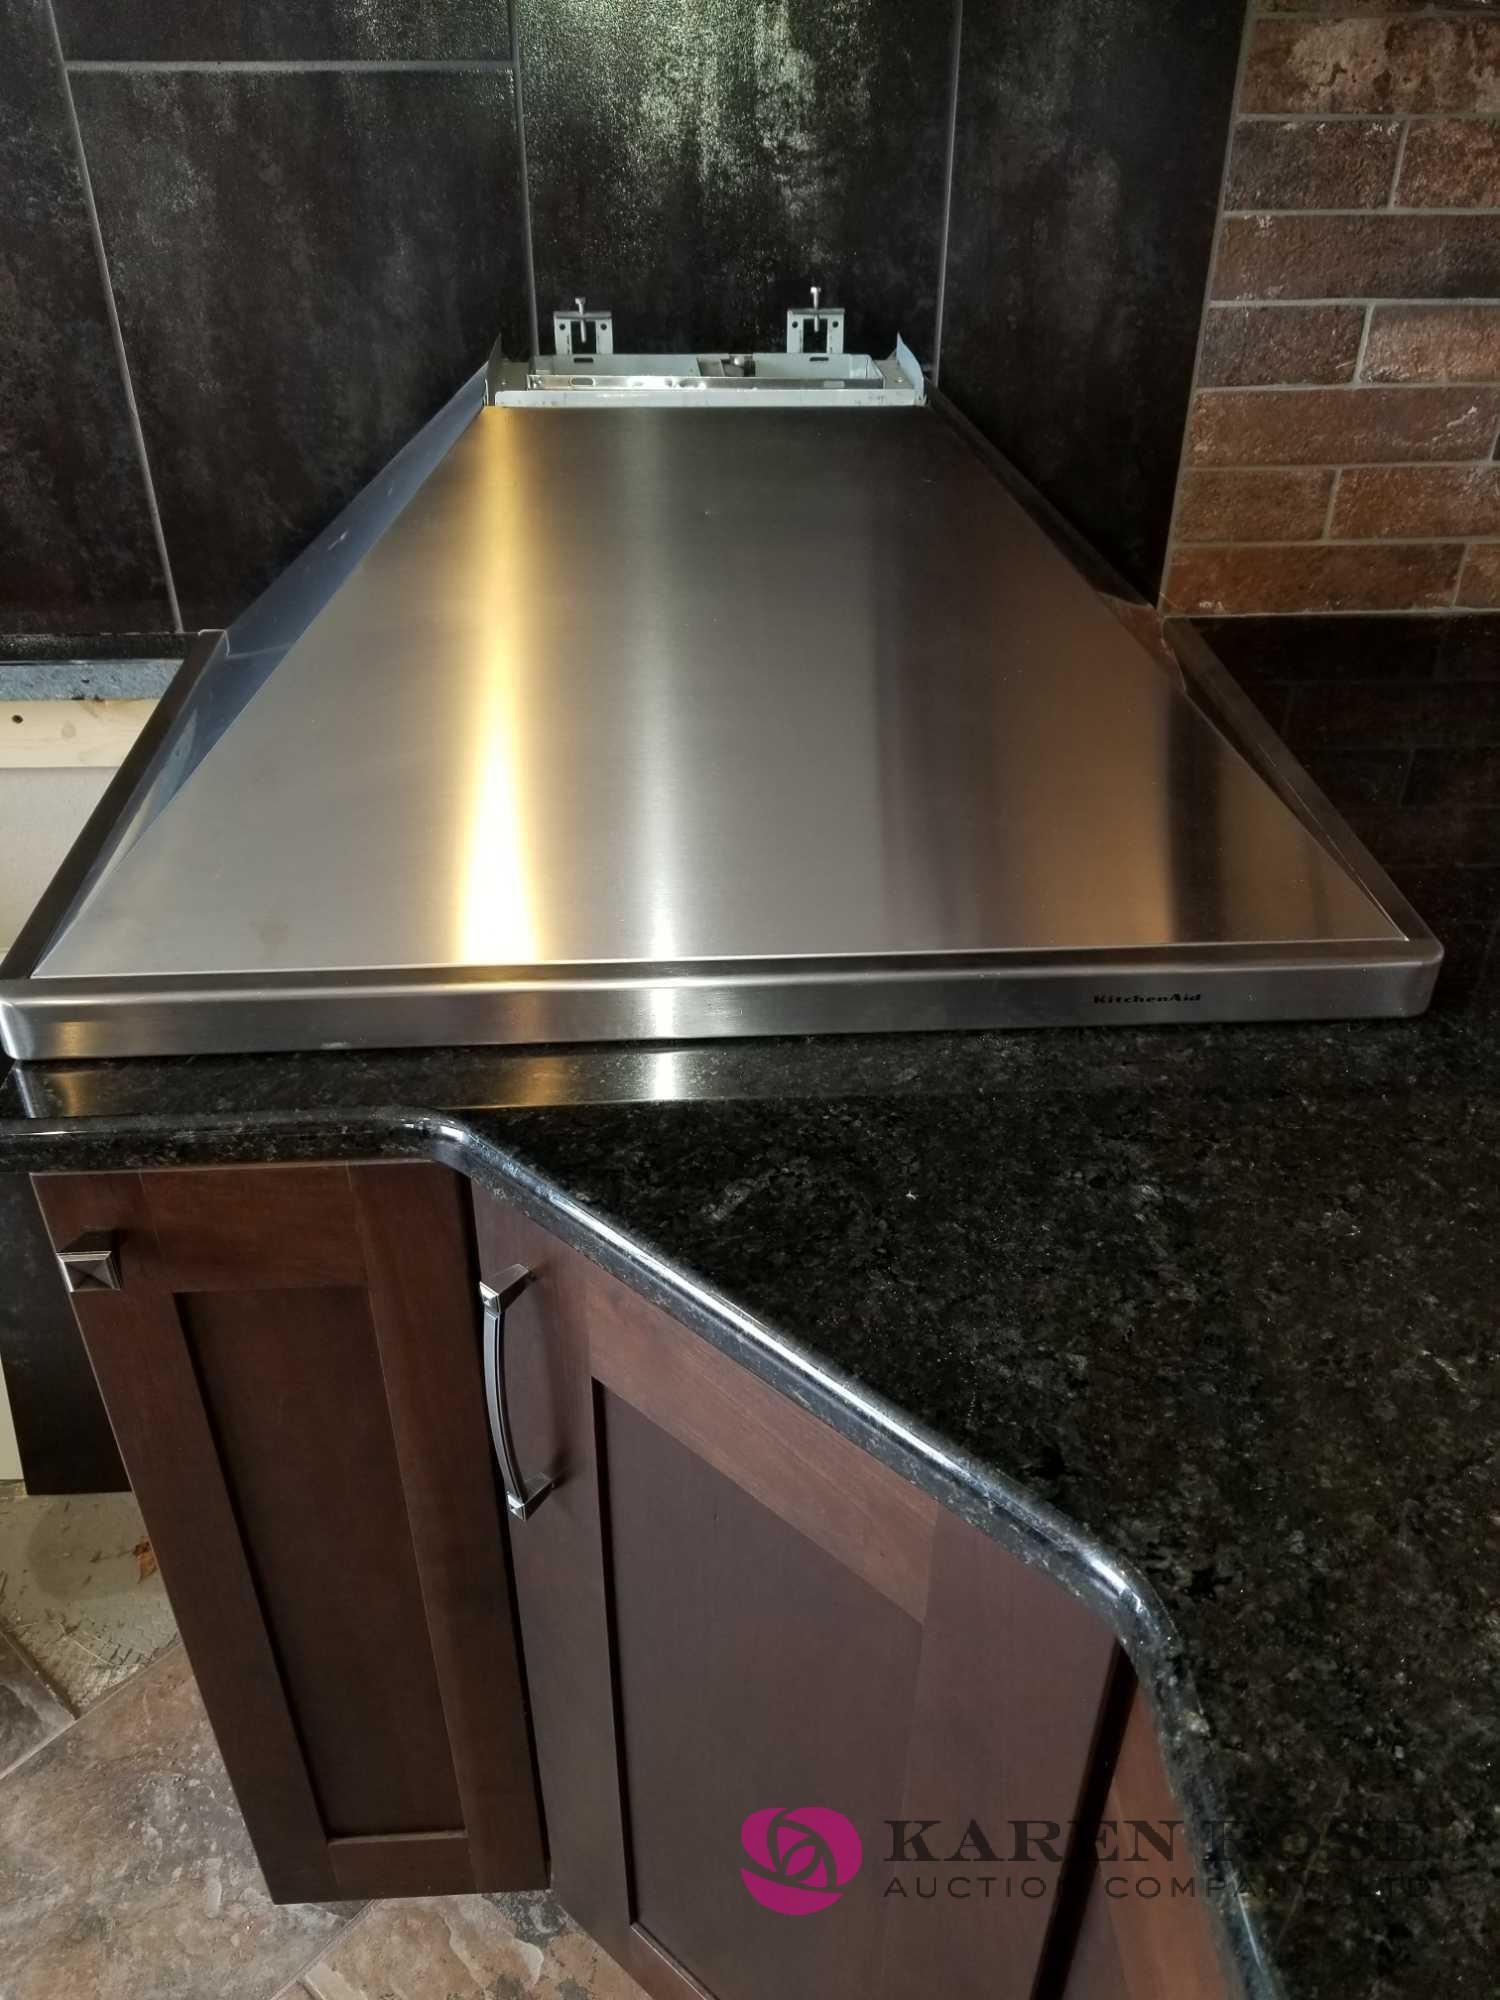 Beautiful Kitchen Cabinets with Farm Sink